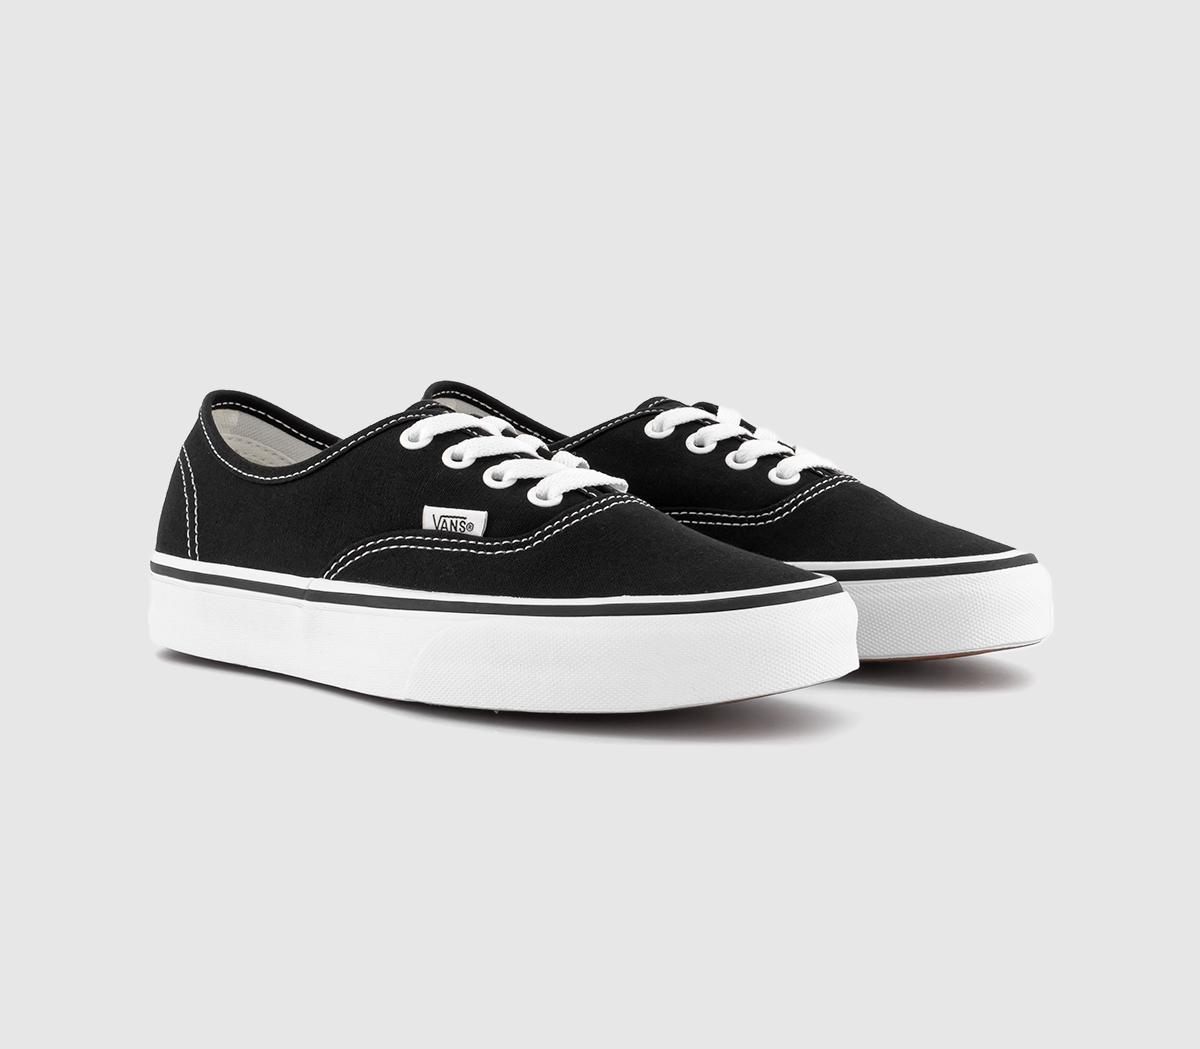 Vans Mens Authentic Trainers In Black And White, 4